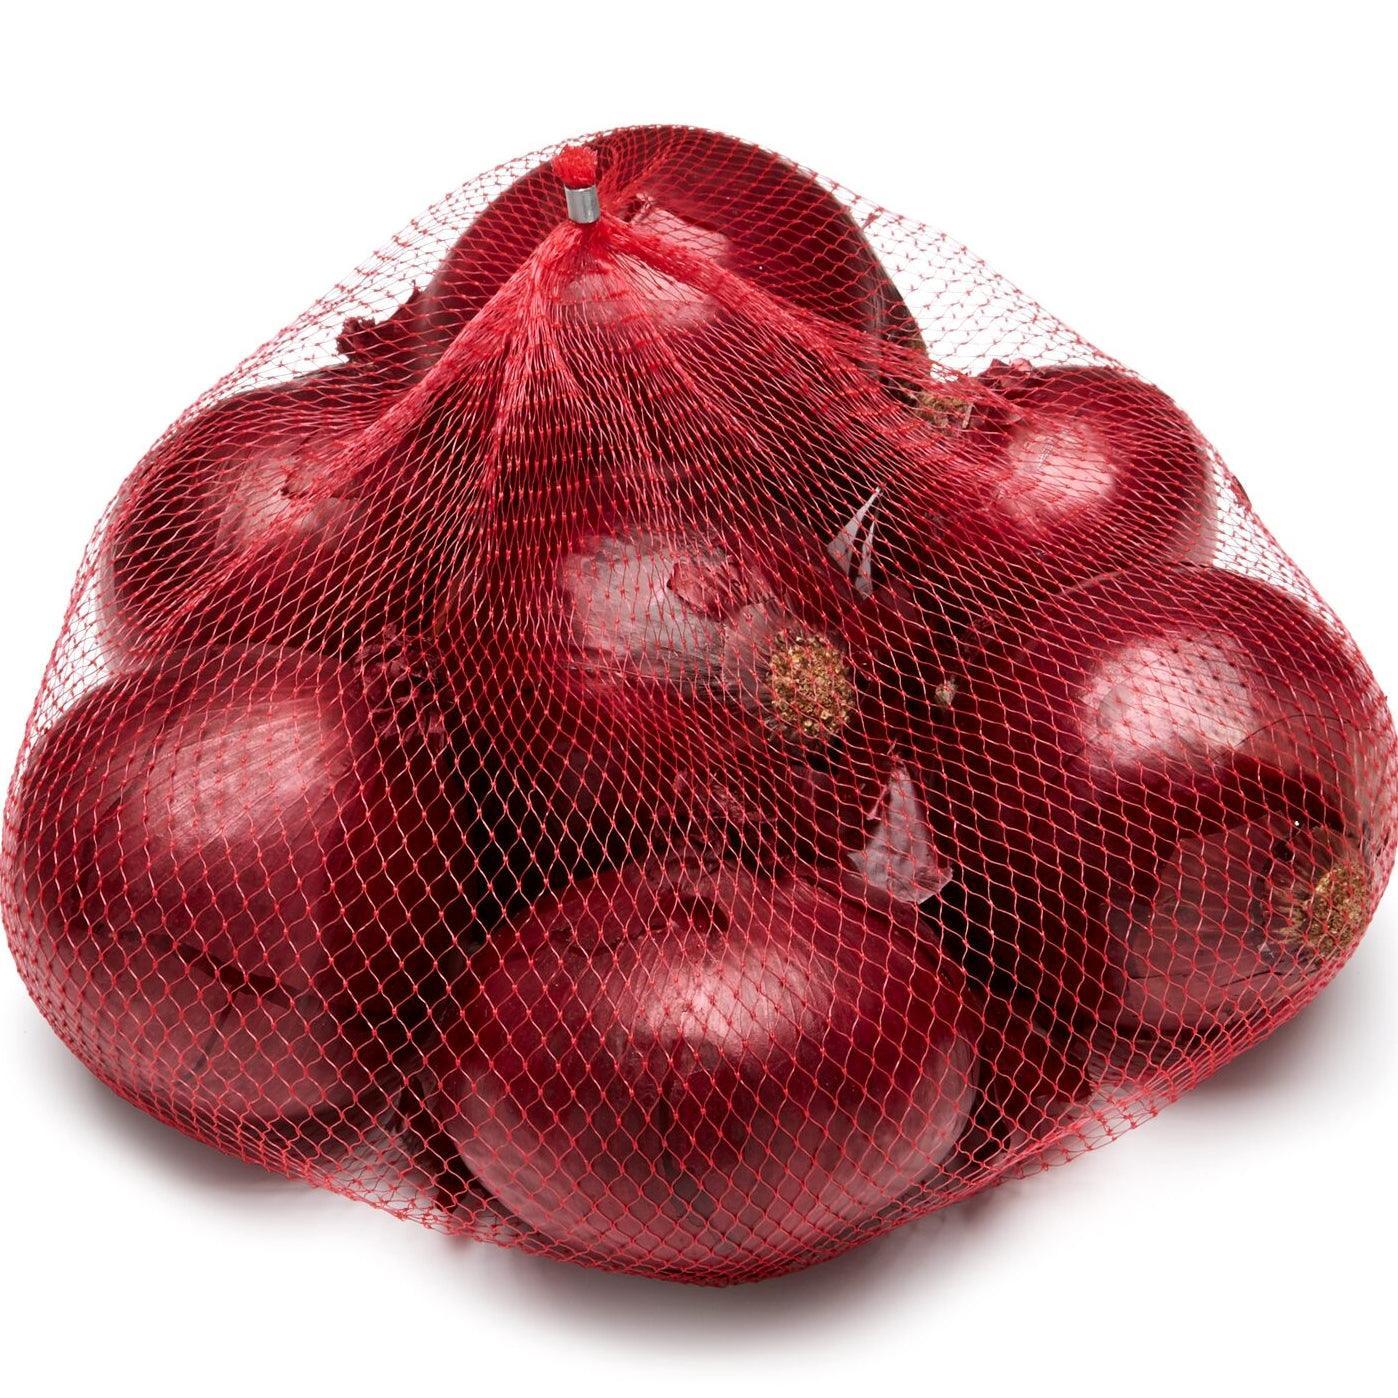 Red Onion - East Side Grocery